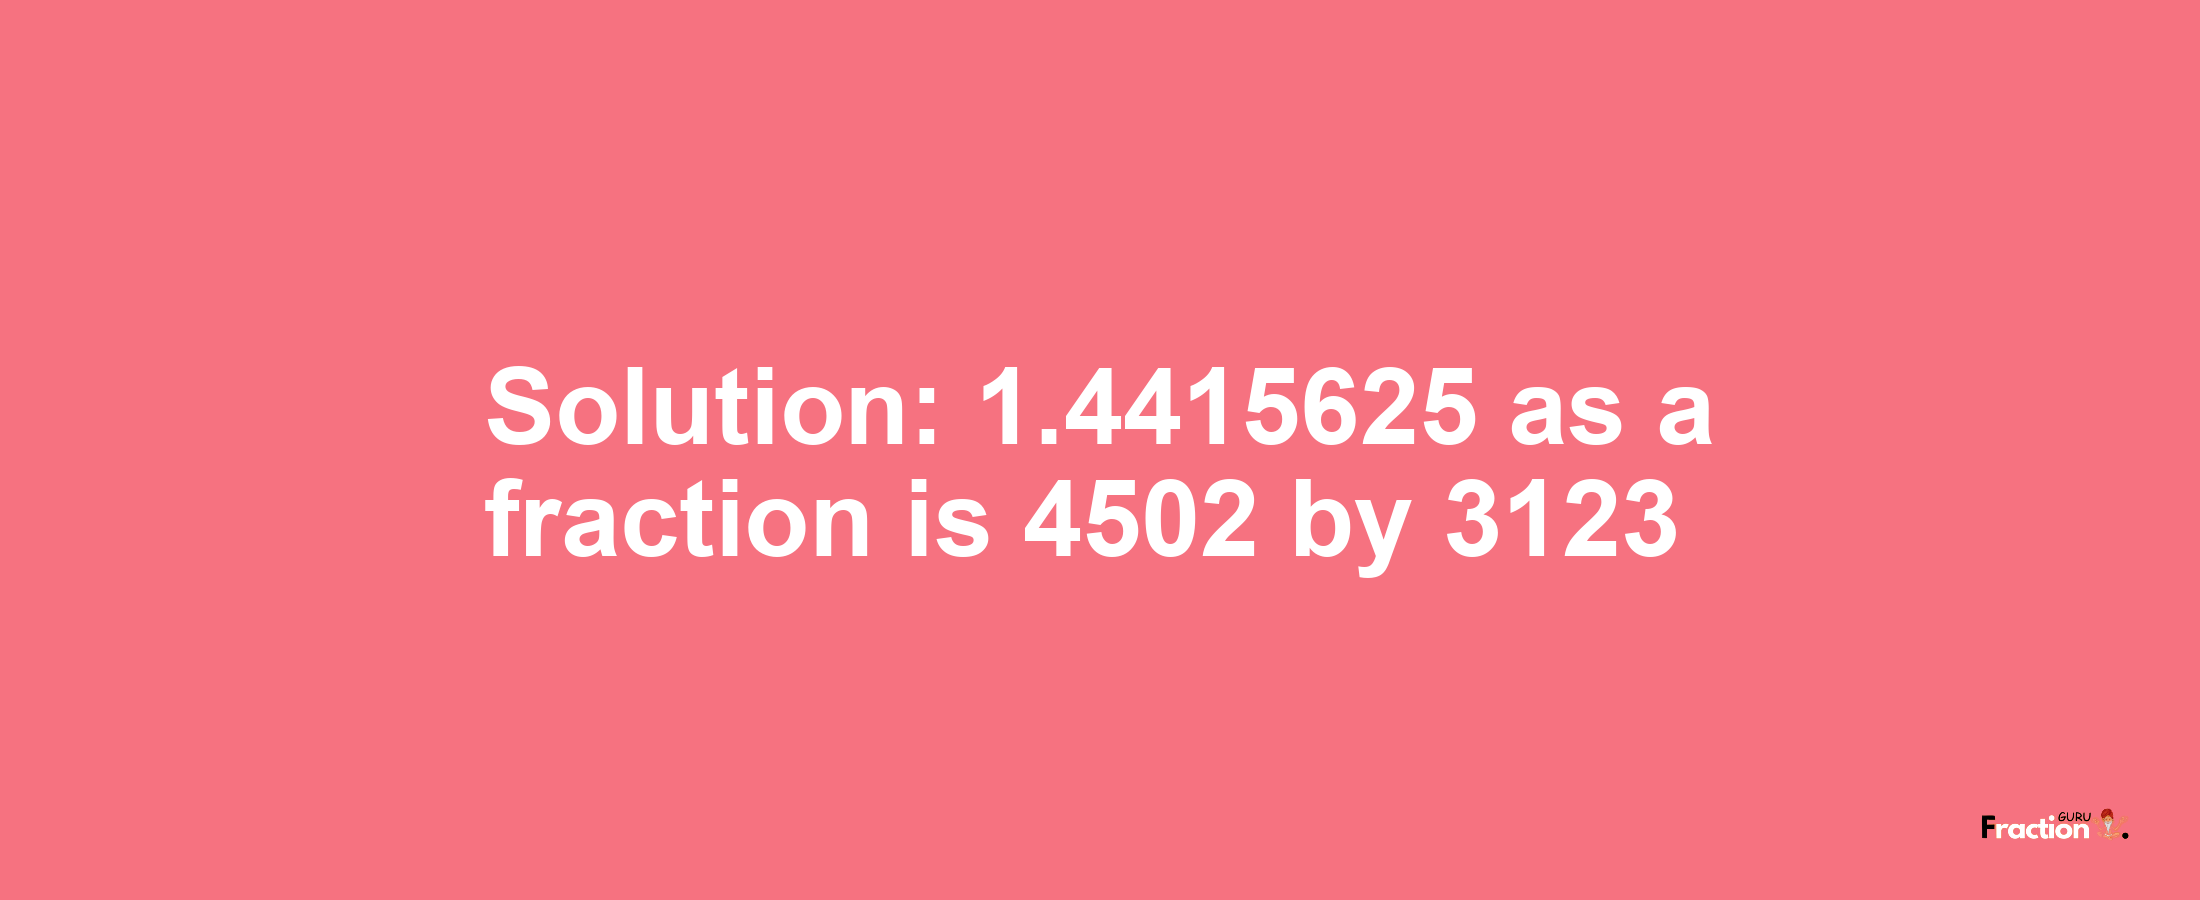 Solution:1.4415625 as a fraction is 4502/3123